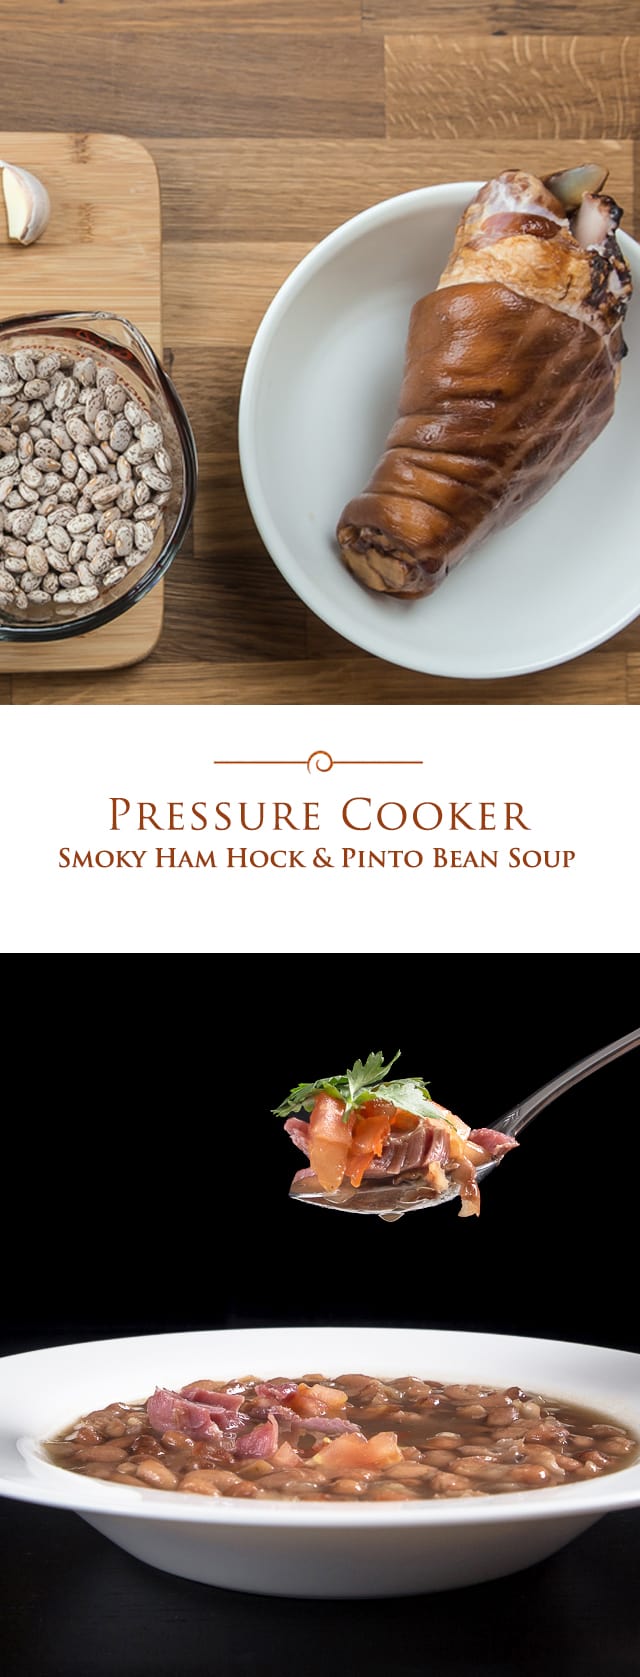 Smoky Ham Hock and Pinto Bean Soup is full of textures and flavors. You'll love the tender & moist ham lending its' smoky flavors to the fulfilling soup. This easy pressure cooker ham and bean soup recipe makes the perfect comfort food dinner. #soup #instantpot #pressurecooker via @PressureCook2da